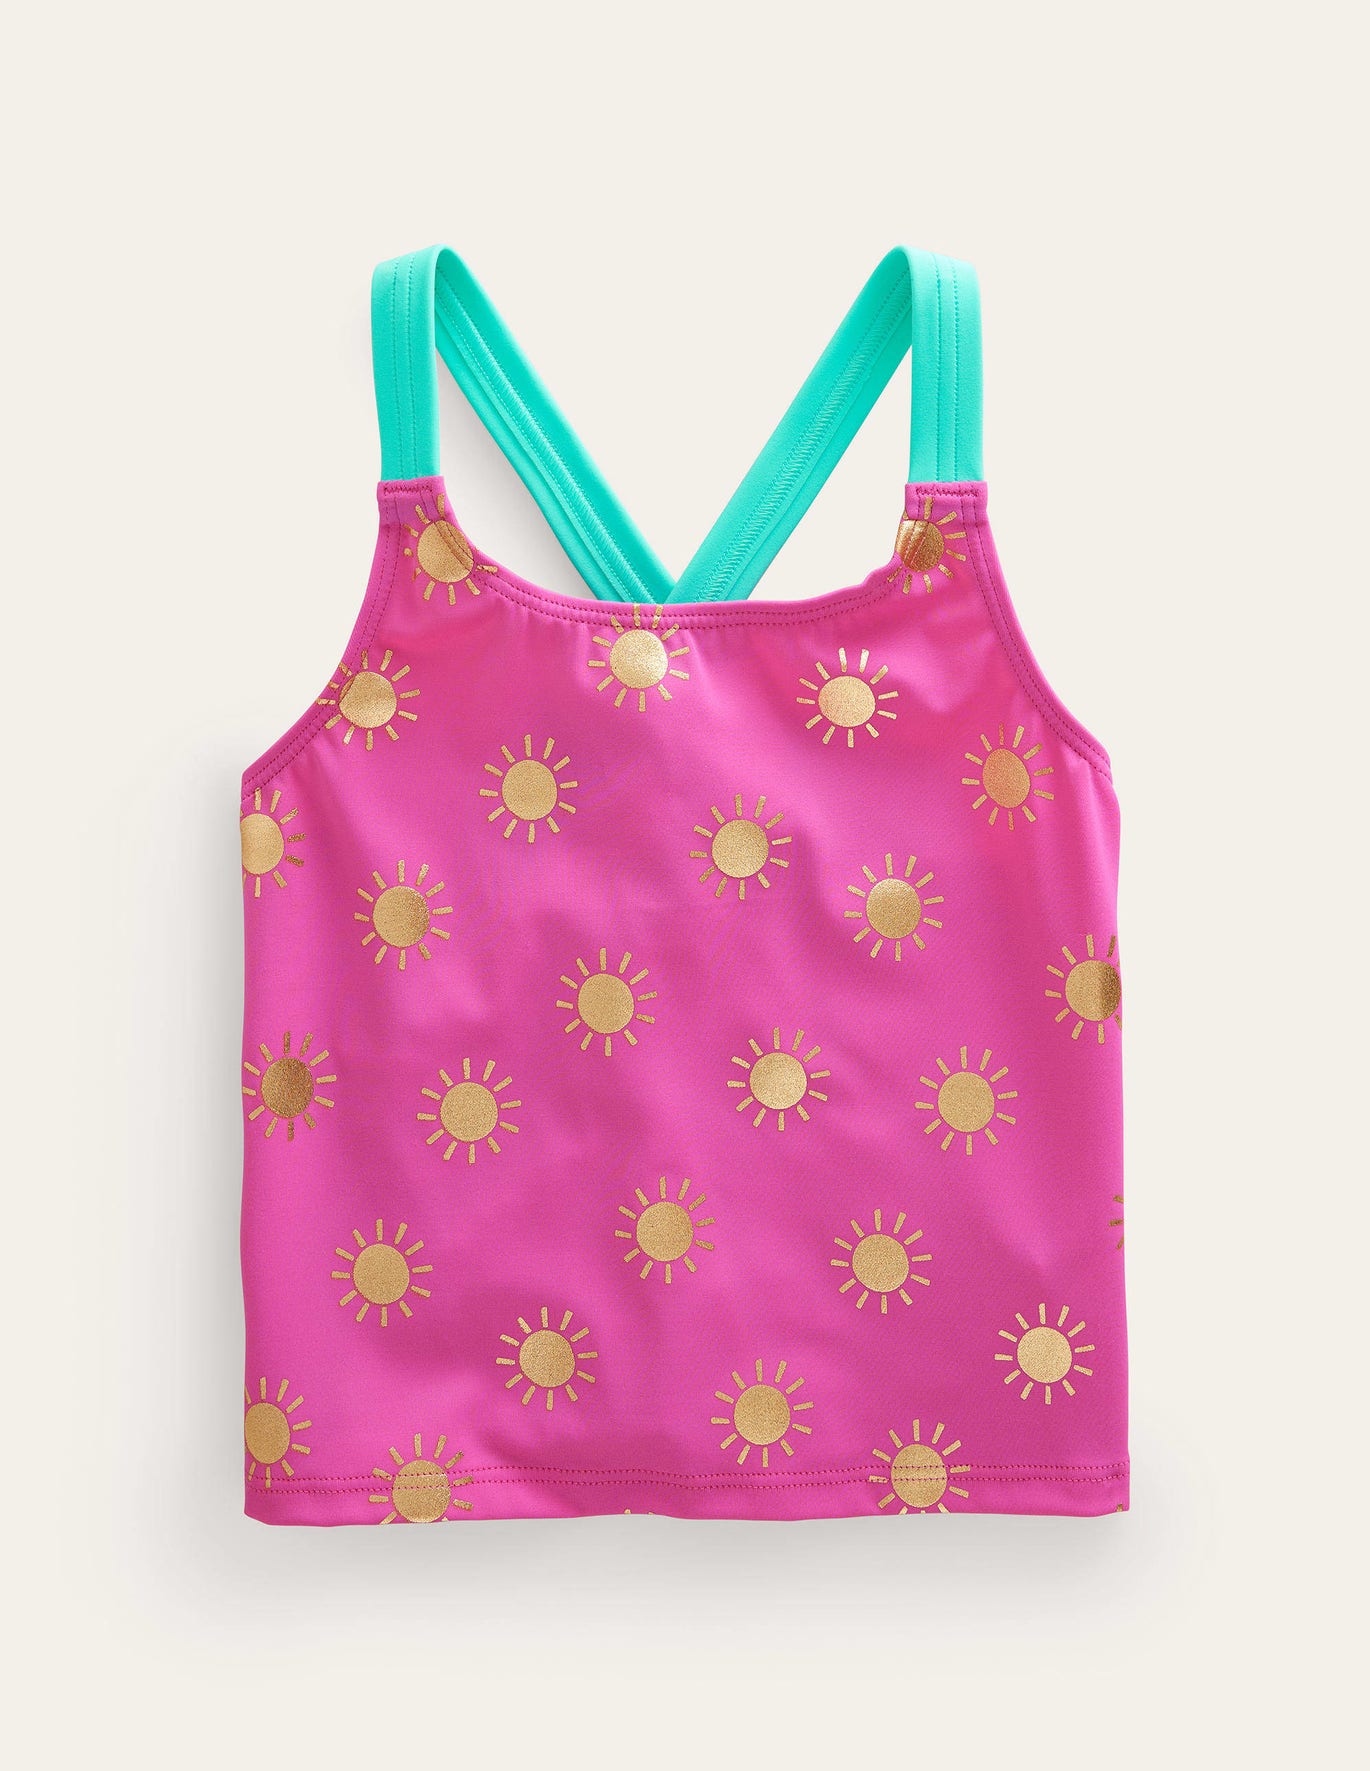 Boden Cross Back Tankini Top - Tickled Pink Gold Foil Suns